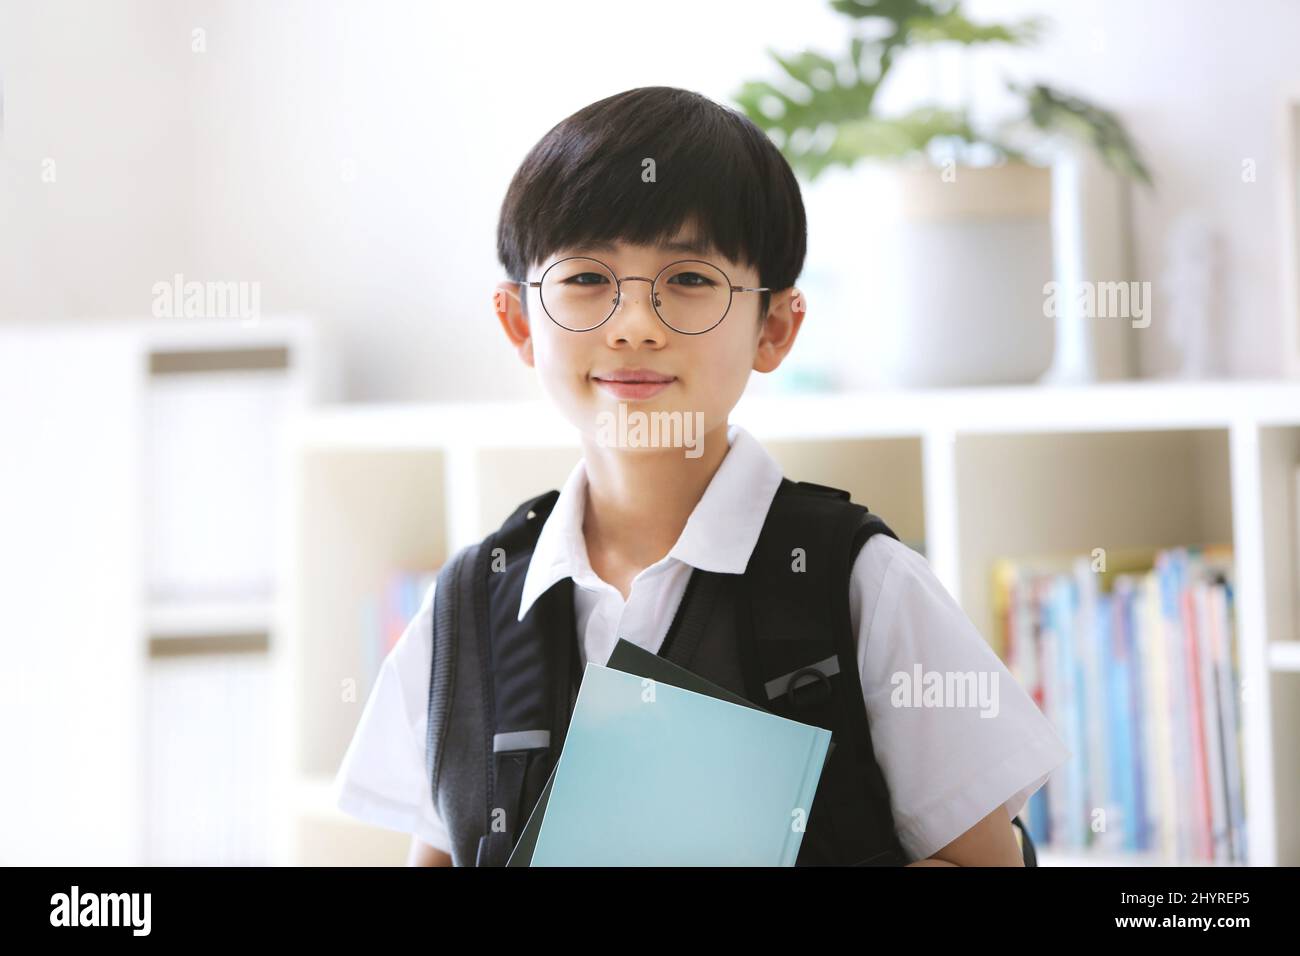 Graduation, admission and new semester A cute and smart boy carrying a backpack and smiling brightly goes to school with a book. Stock Photo